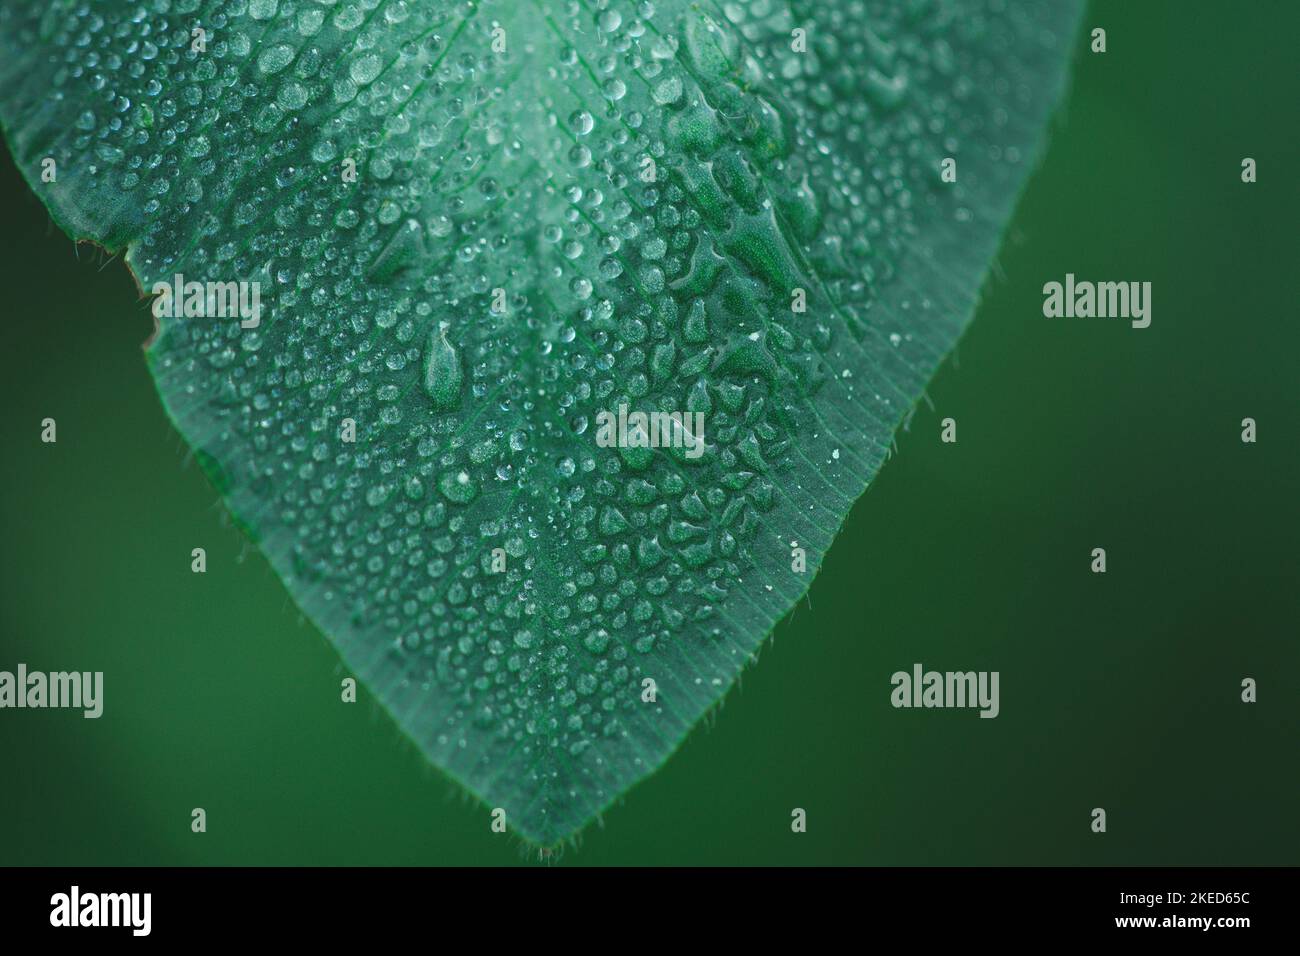 A micro shot of a leaf covered by water drops on a green background Stock Photo